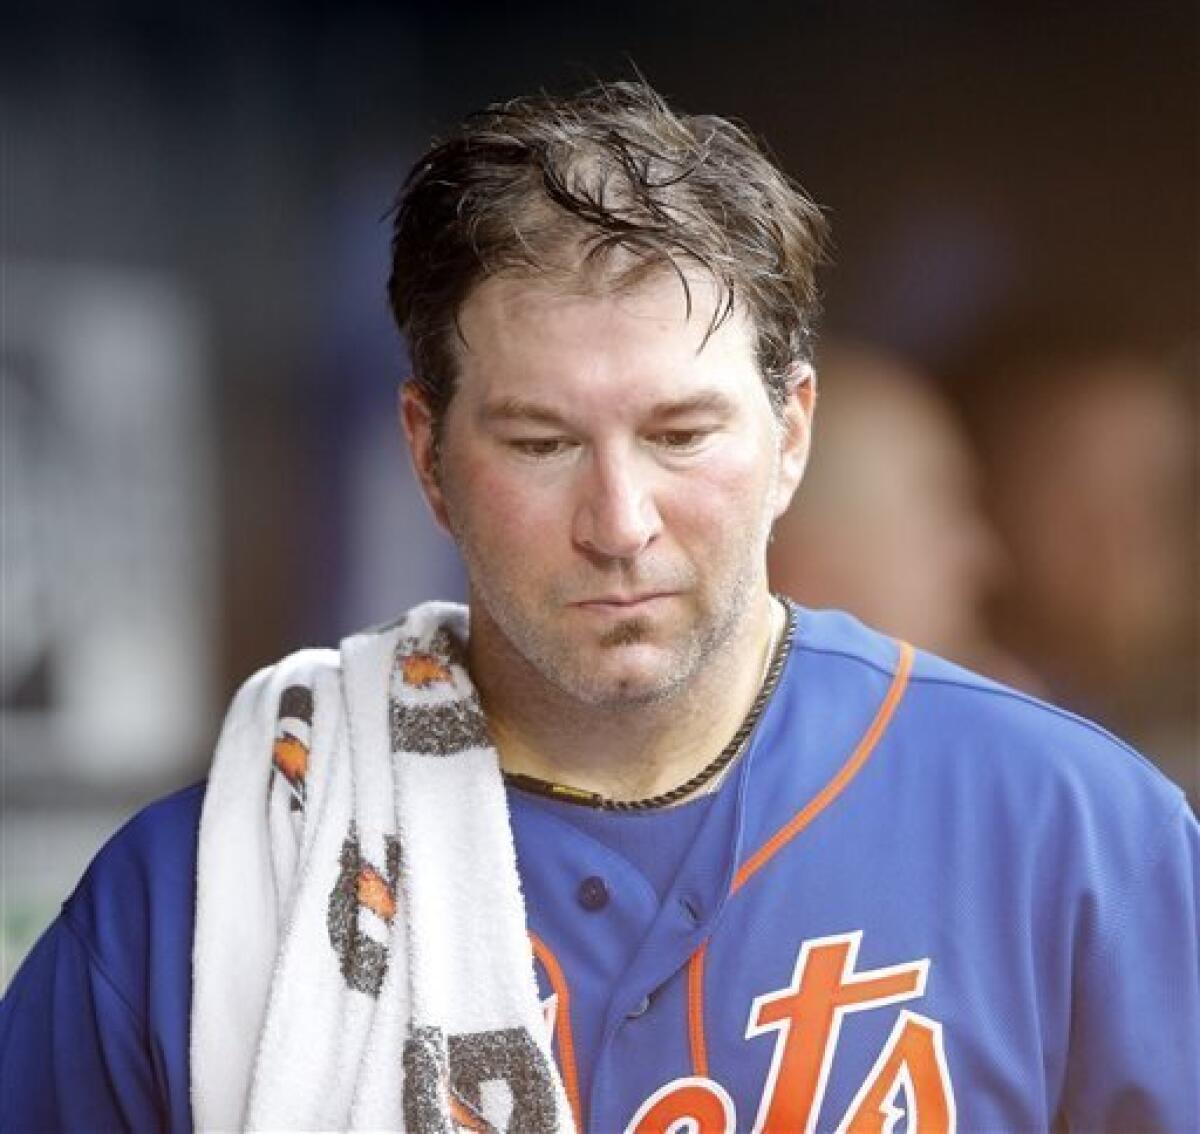 Long day: Mets lose to Marlins 2-1 in 20 innings - The San Diego